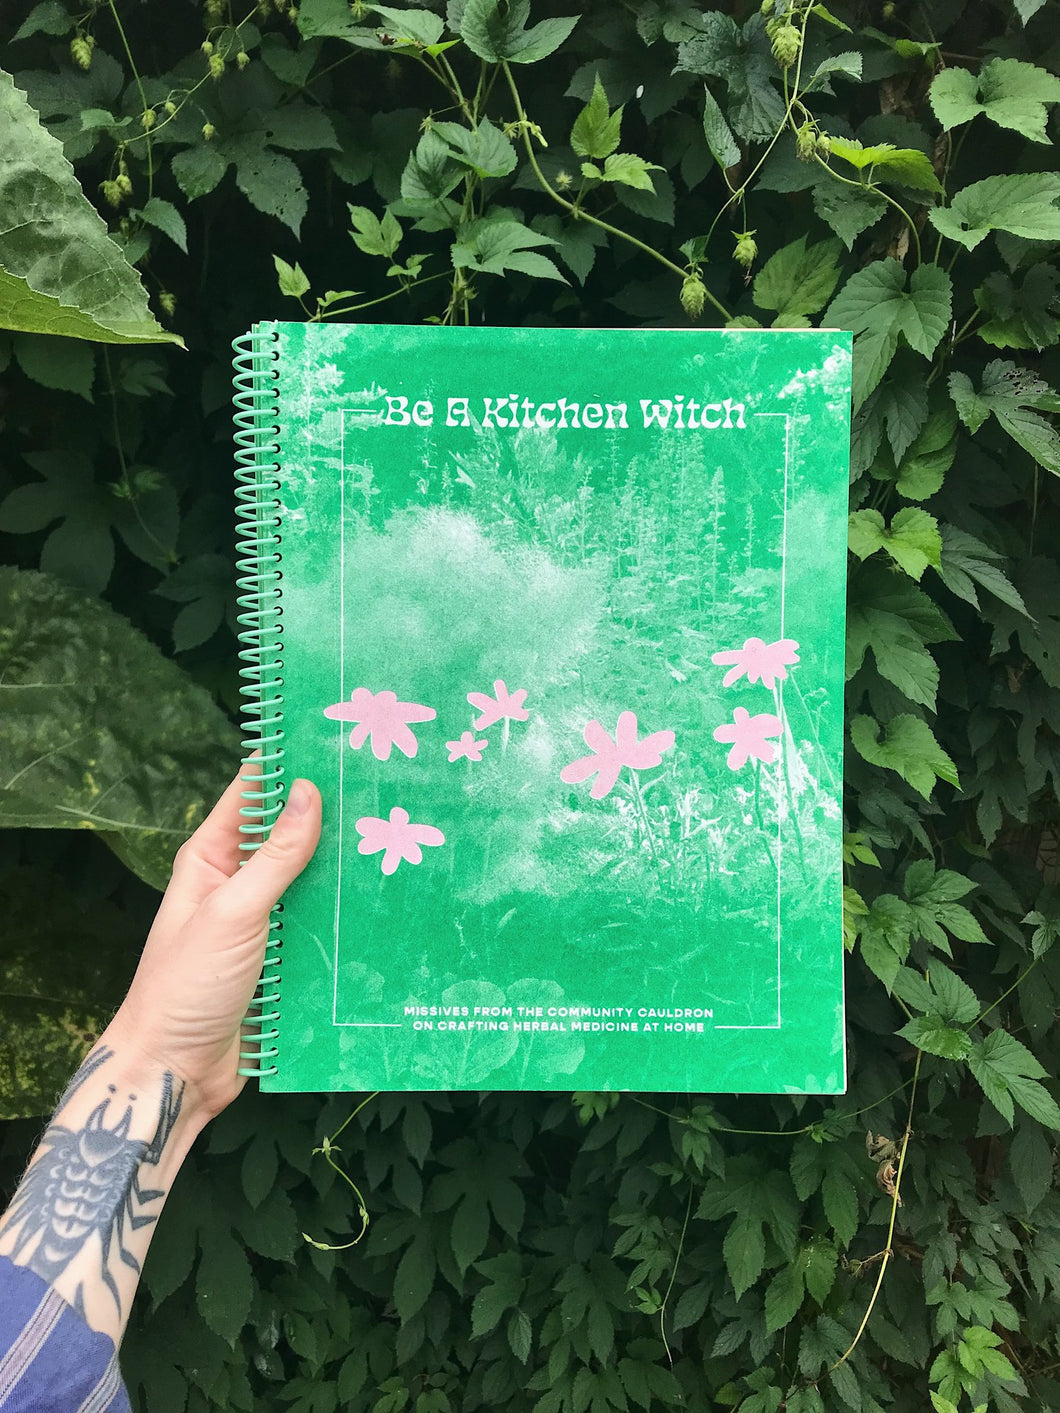 Be a Kitchen Witch: Missives from the Community Cauldron On Crafting Herbal Medicine at Home zine